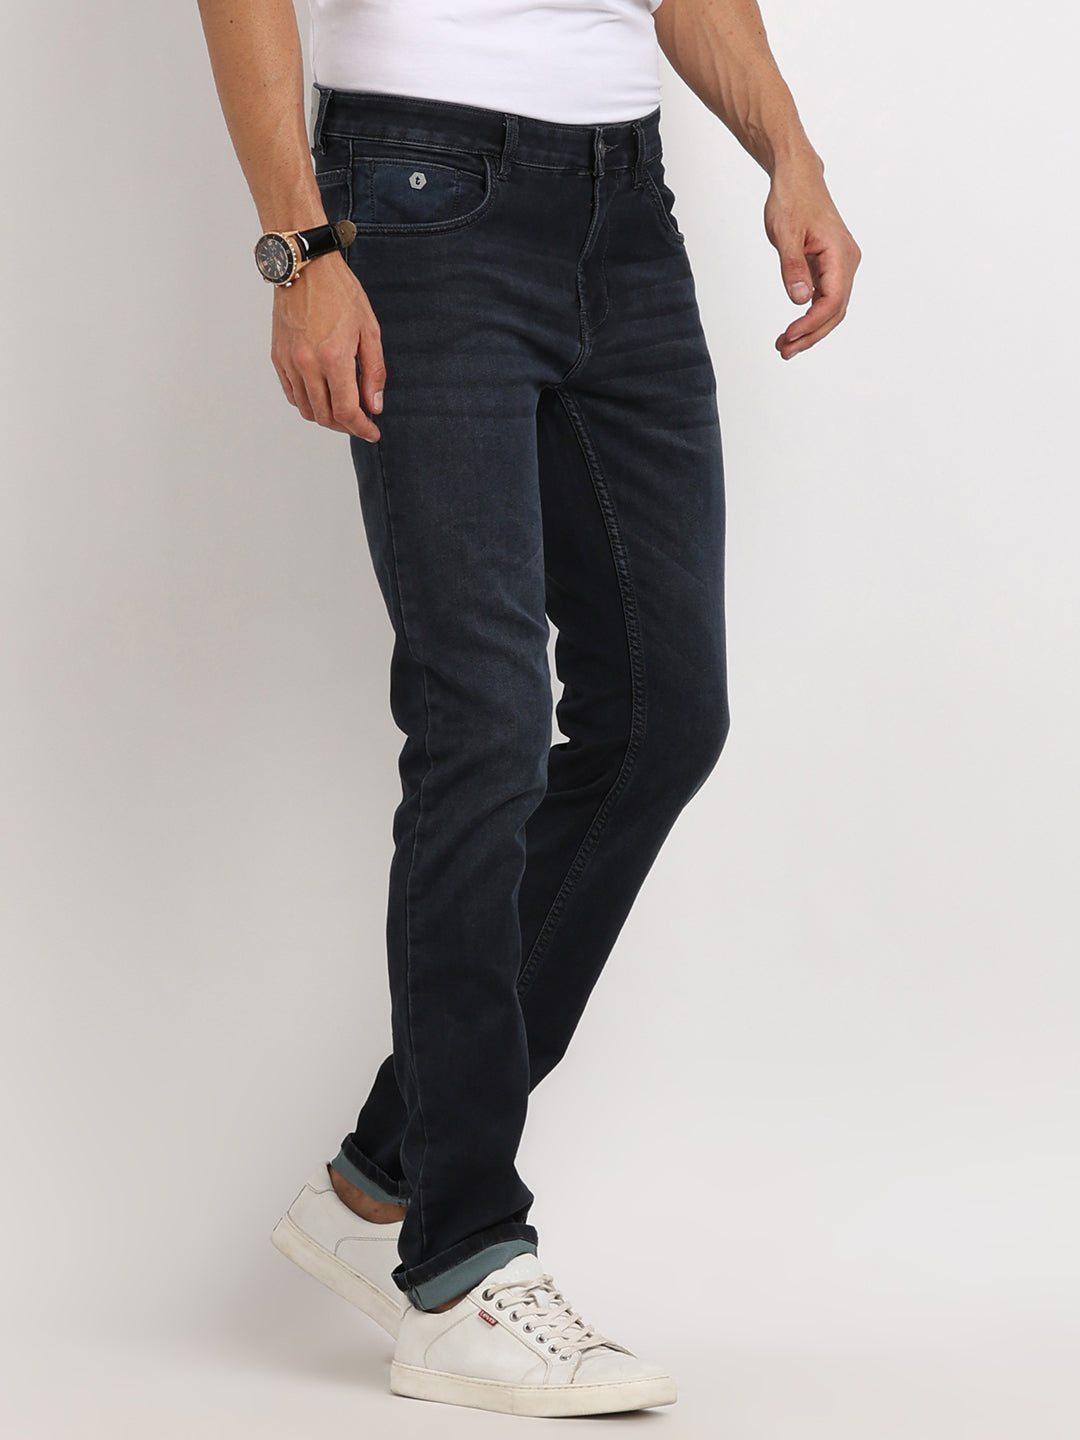 Cotton Stretch Dark Grey Plain Narrow Fit Flat Front Casual Jeans